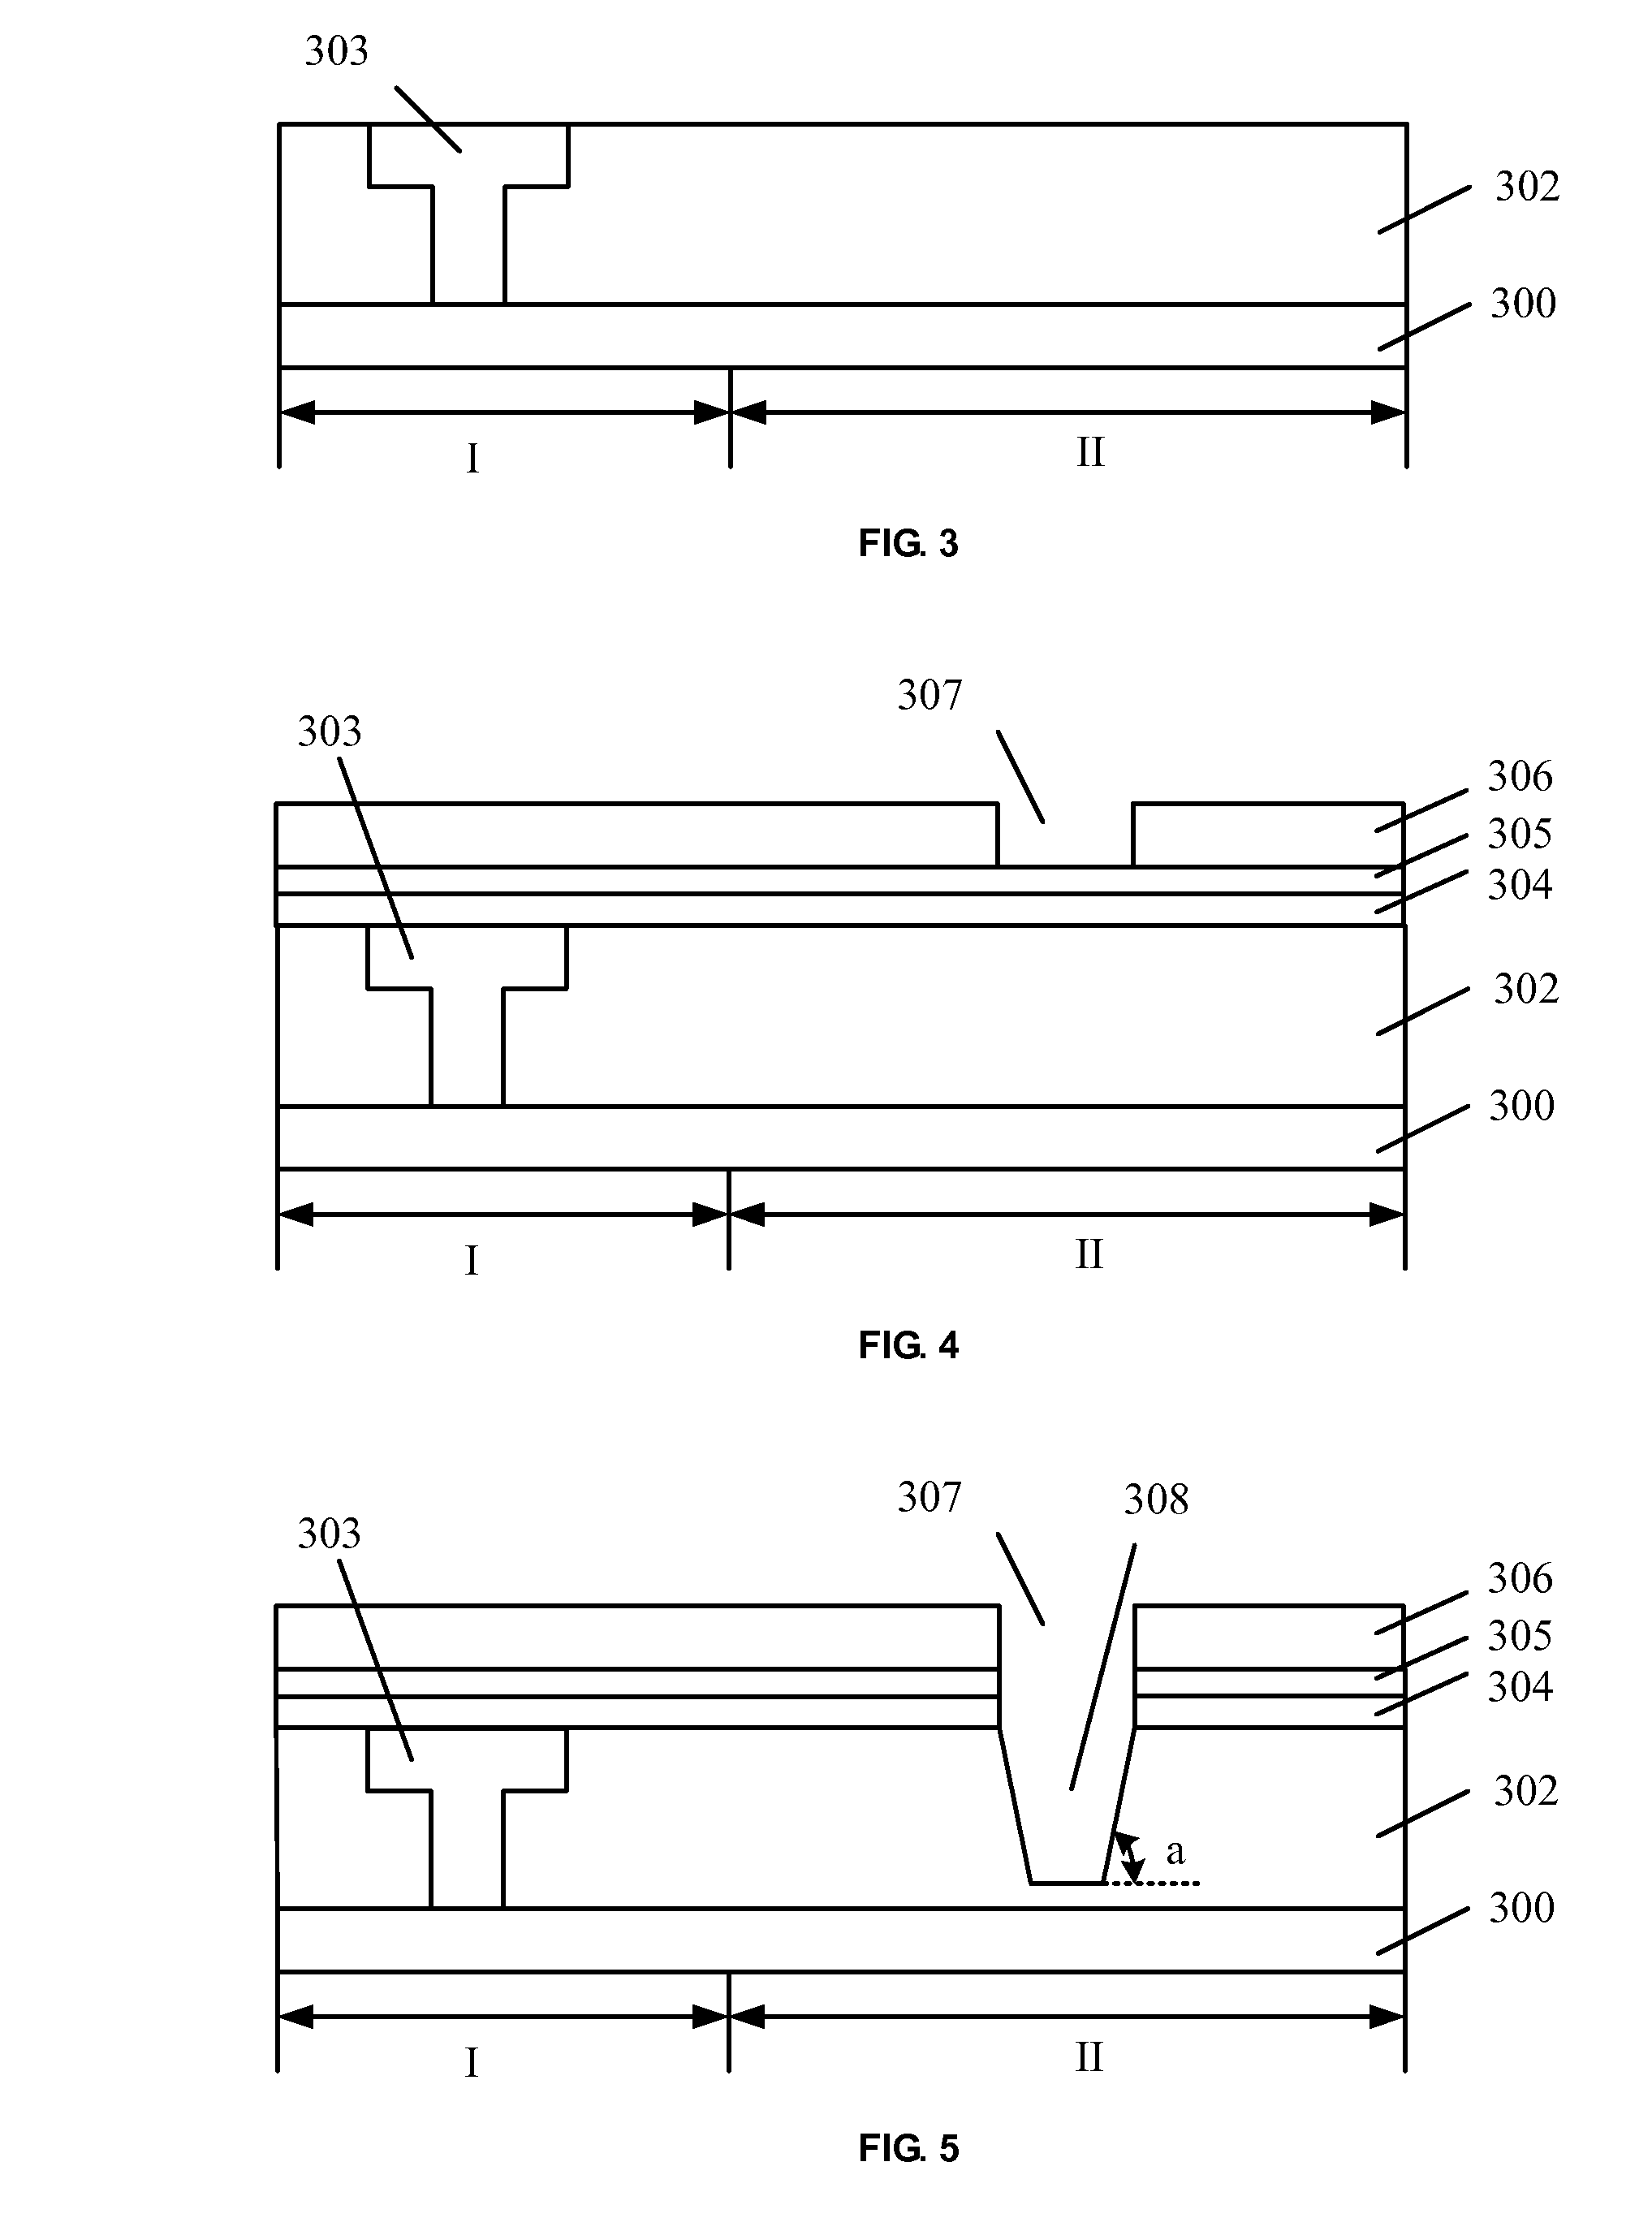 Magnetoresistive memory device and fabrictaion method